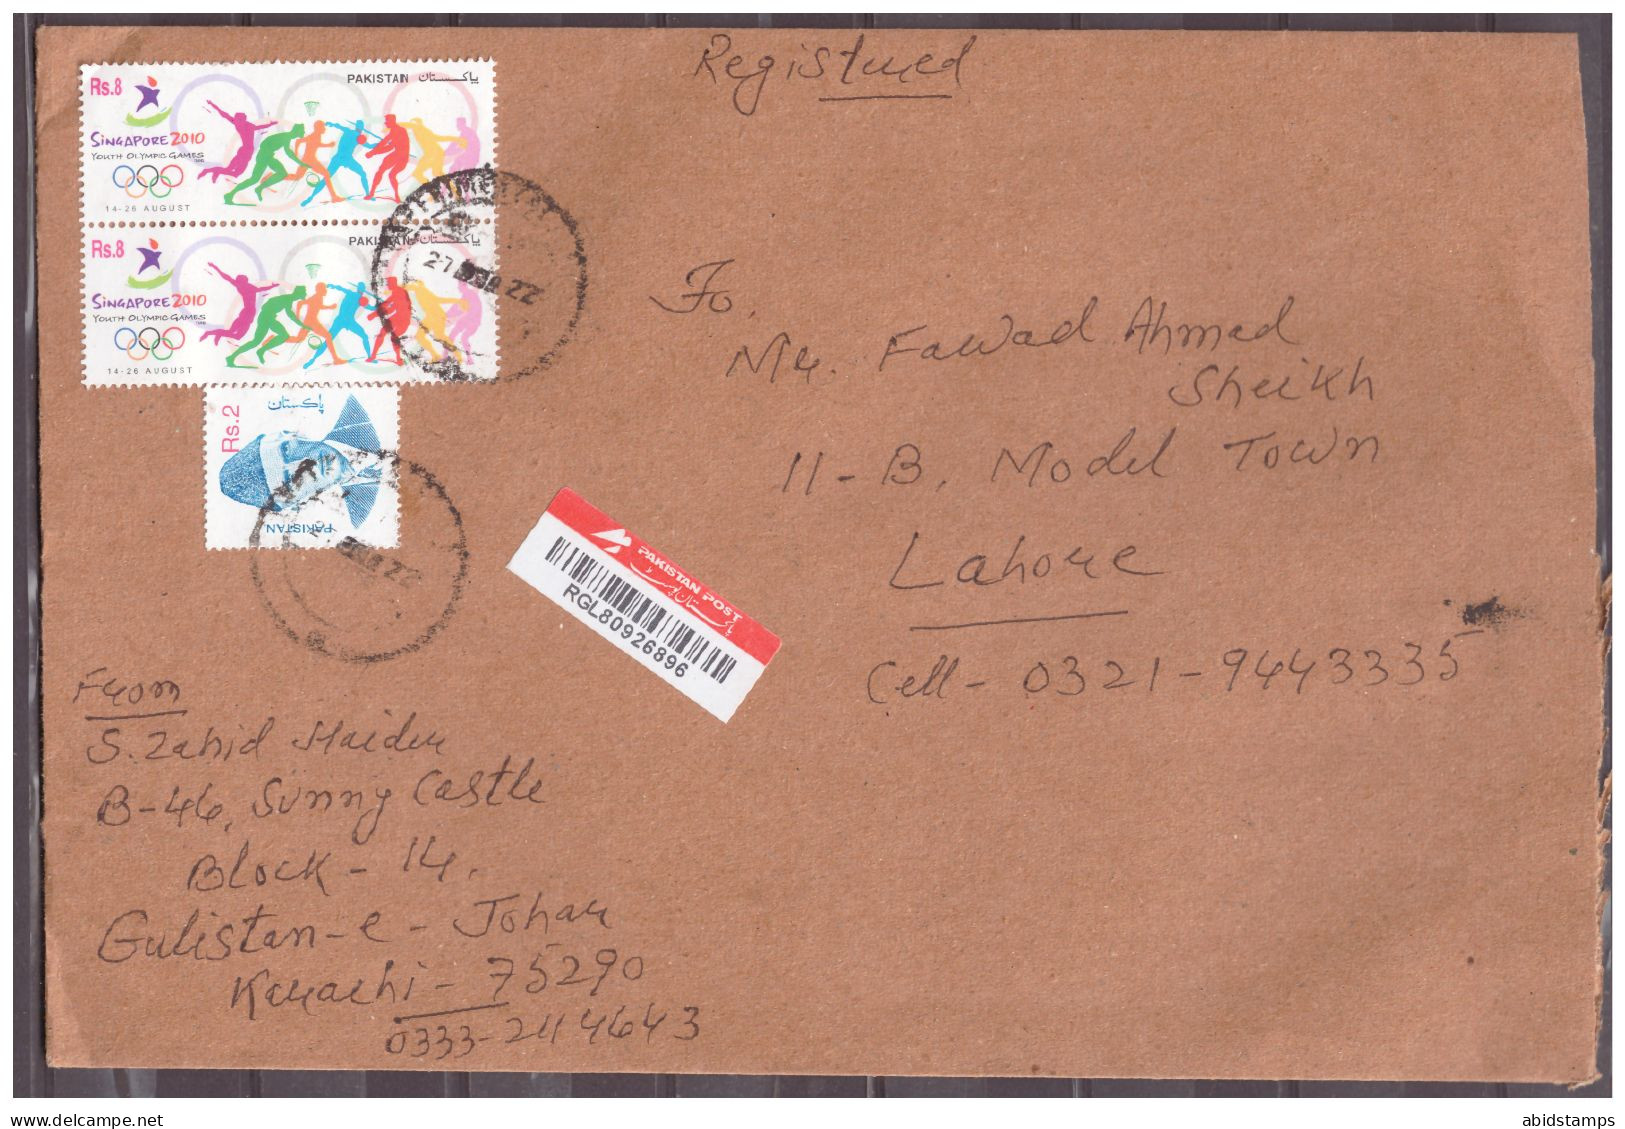 PAKISTAN USED REGISTERED AIR MAIL DOMESTIC COVER KARACHI TO LAHORE SPORTS - Pakistan